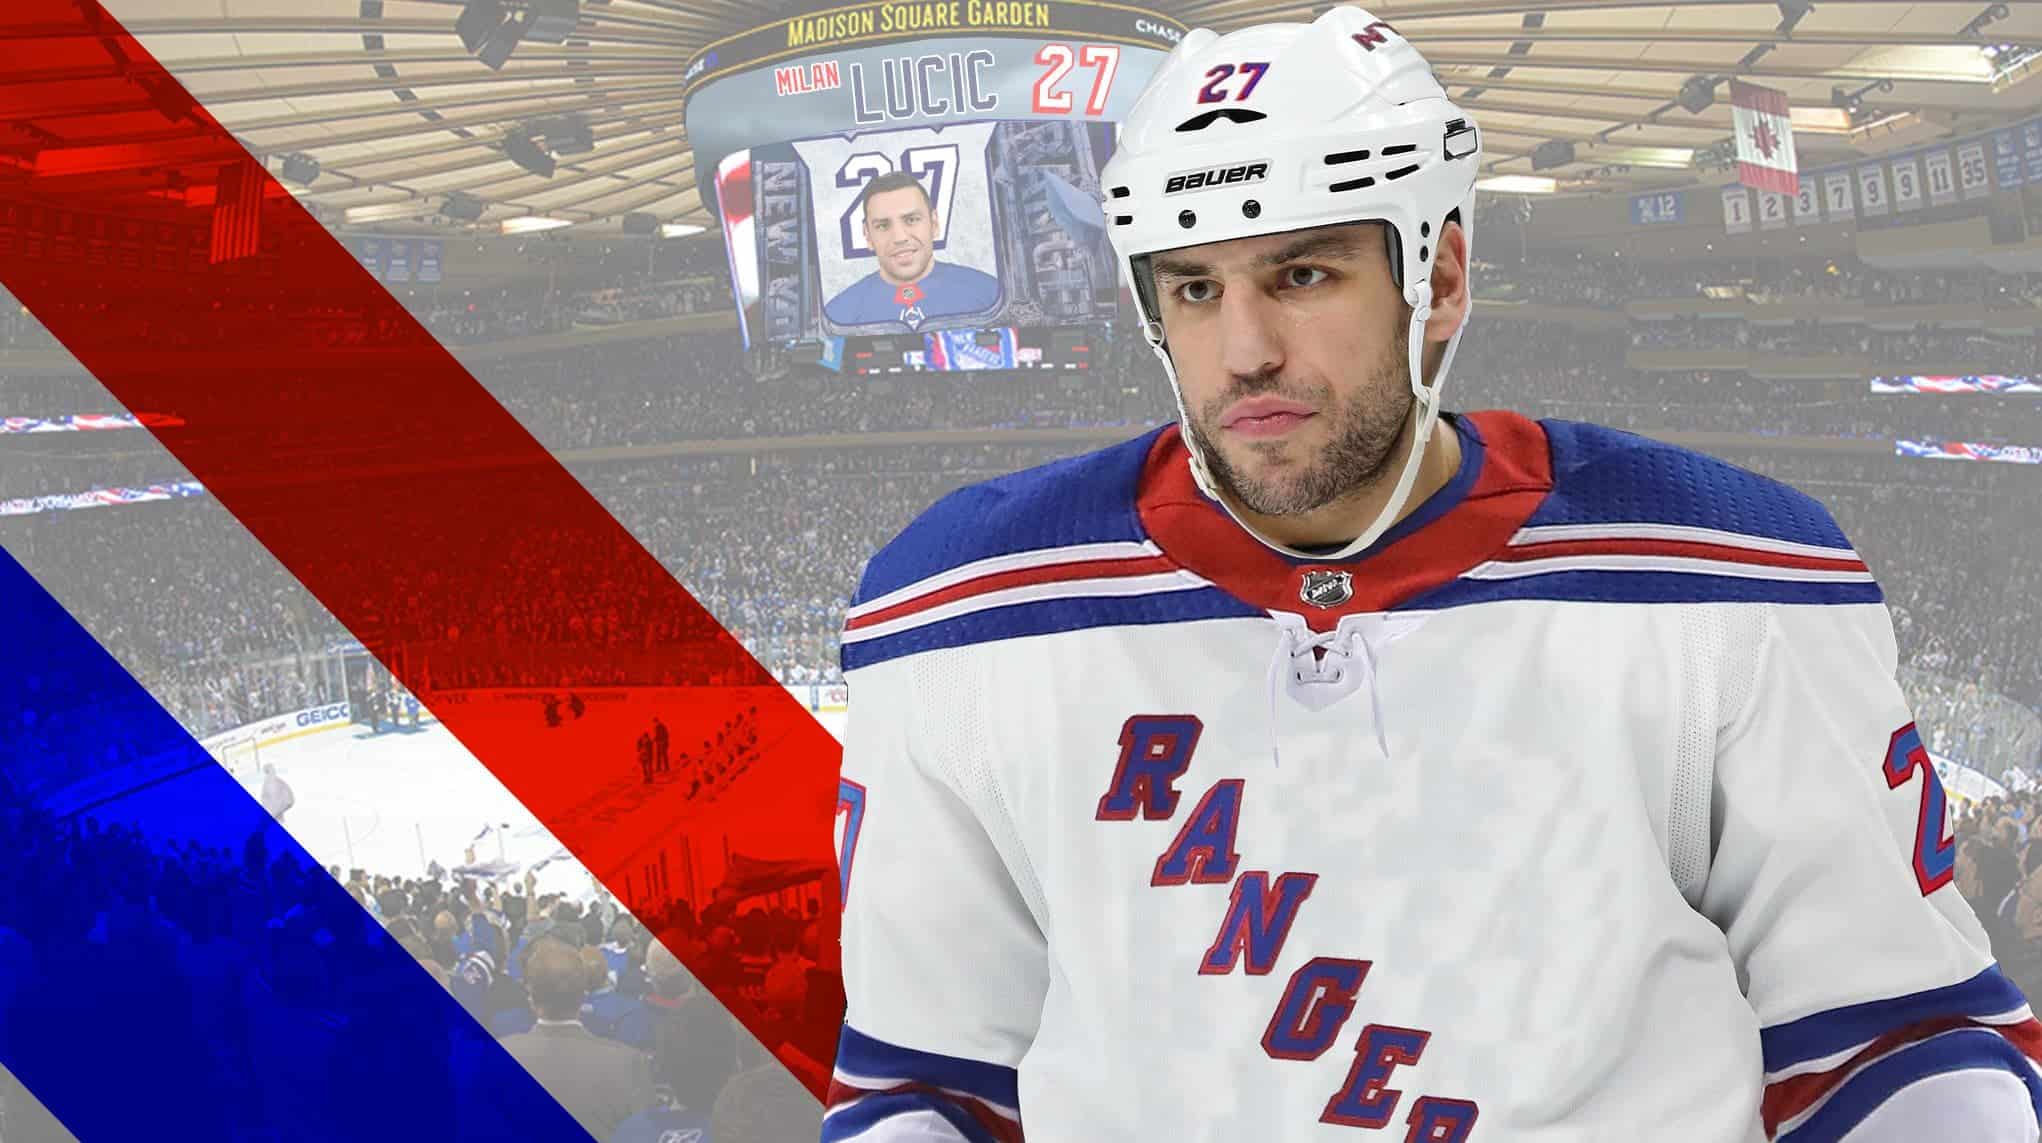 Lucic is a Ridiculous player to bring to the Rangers